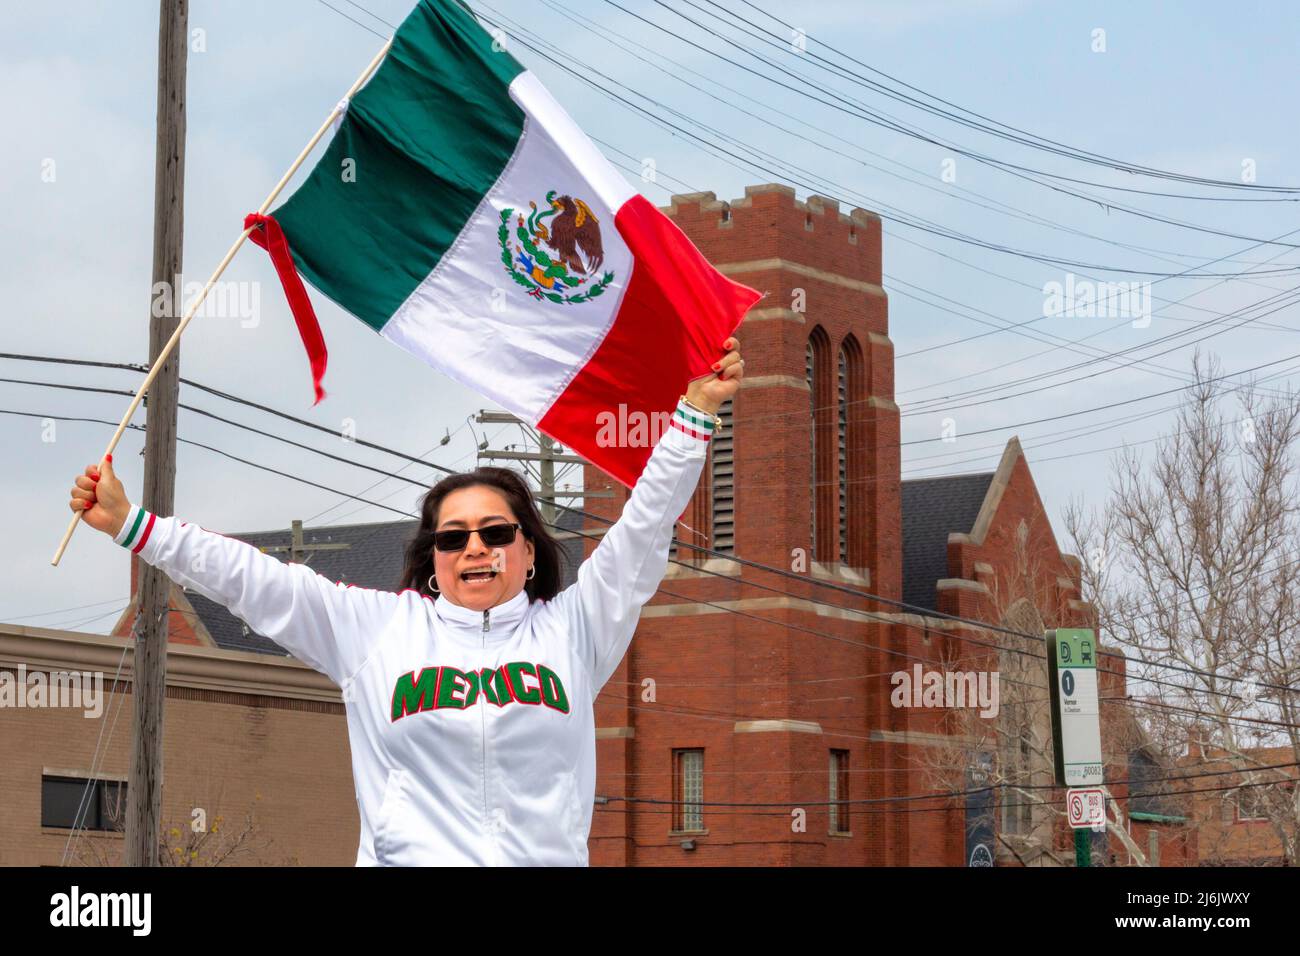 Detroit, Michigan USA - 1 May 2022 - A woman waves a Mexican flag during the Cinco de Mayo parade in Detroit's Mexican-American neighborhood. The annual parade returned in 2022 after a two-year hiatus due to the pandemic. Cinco de Mayo celebrates a Mexican victory over the French on May 5, 1862. Credit: Jim West/Alamy Live News Stock Photo